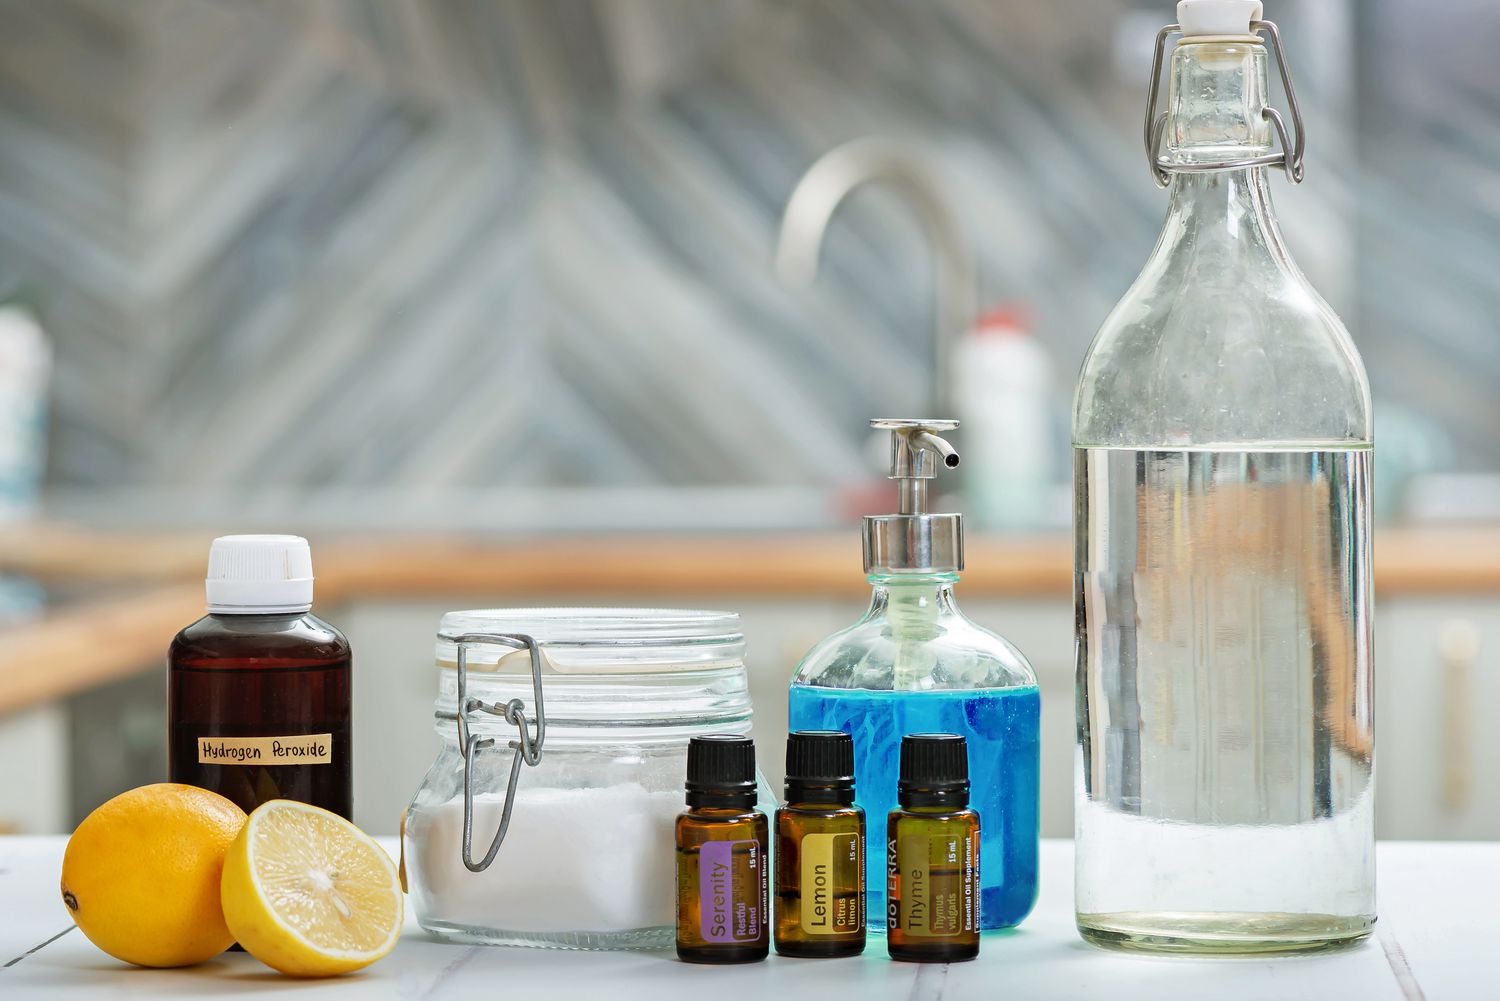 ingredients for homemade cleaners